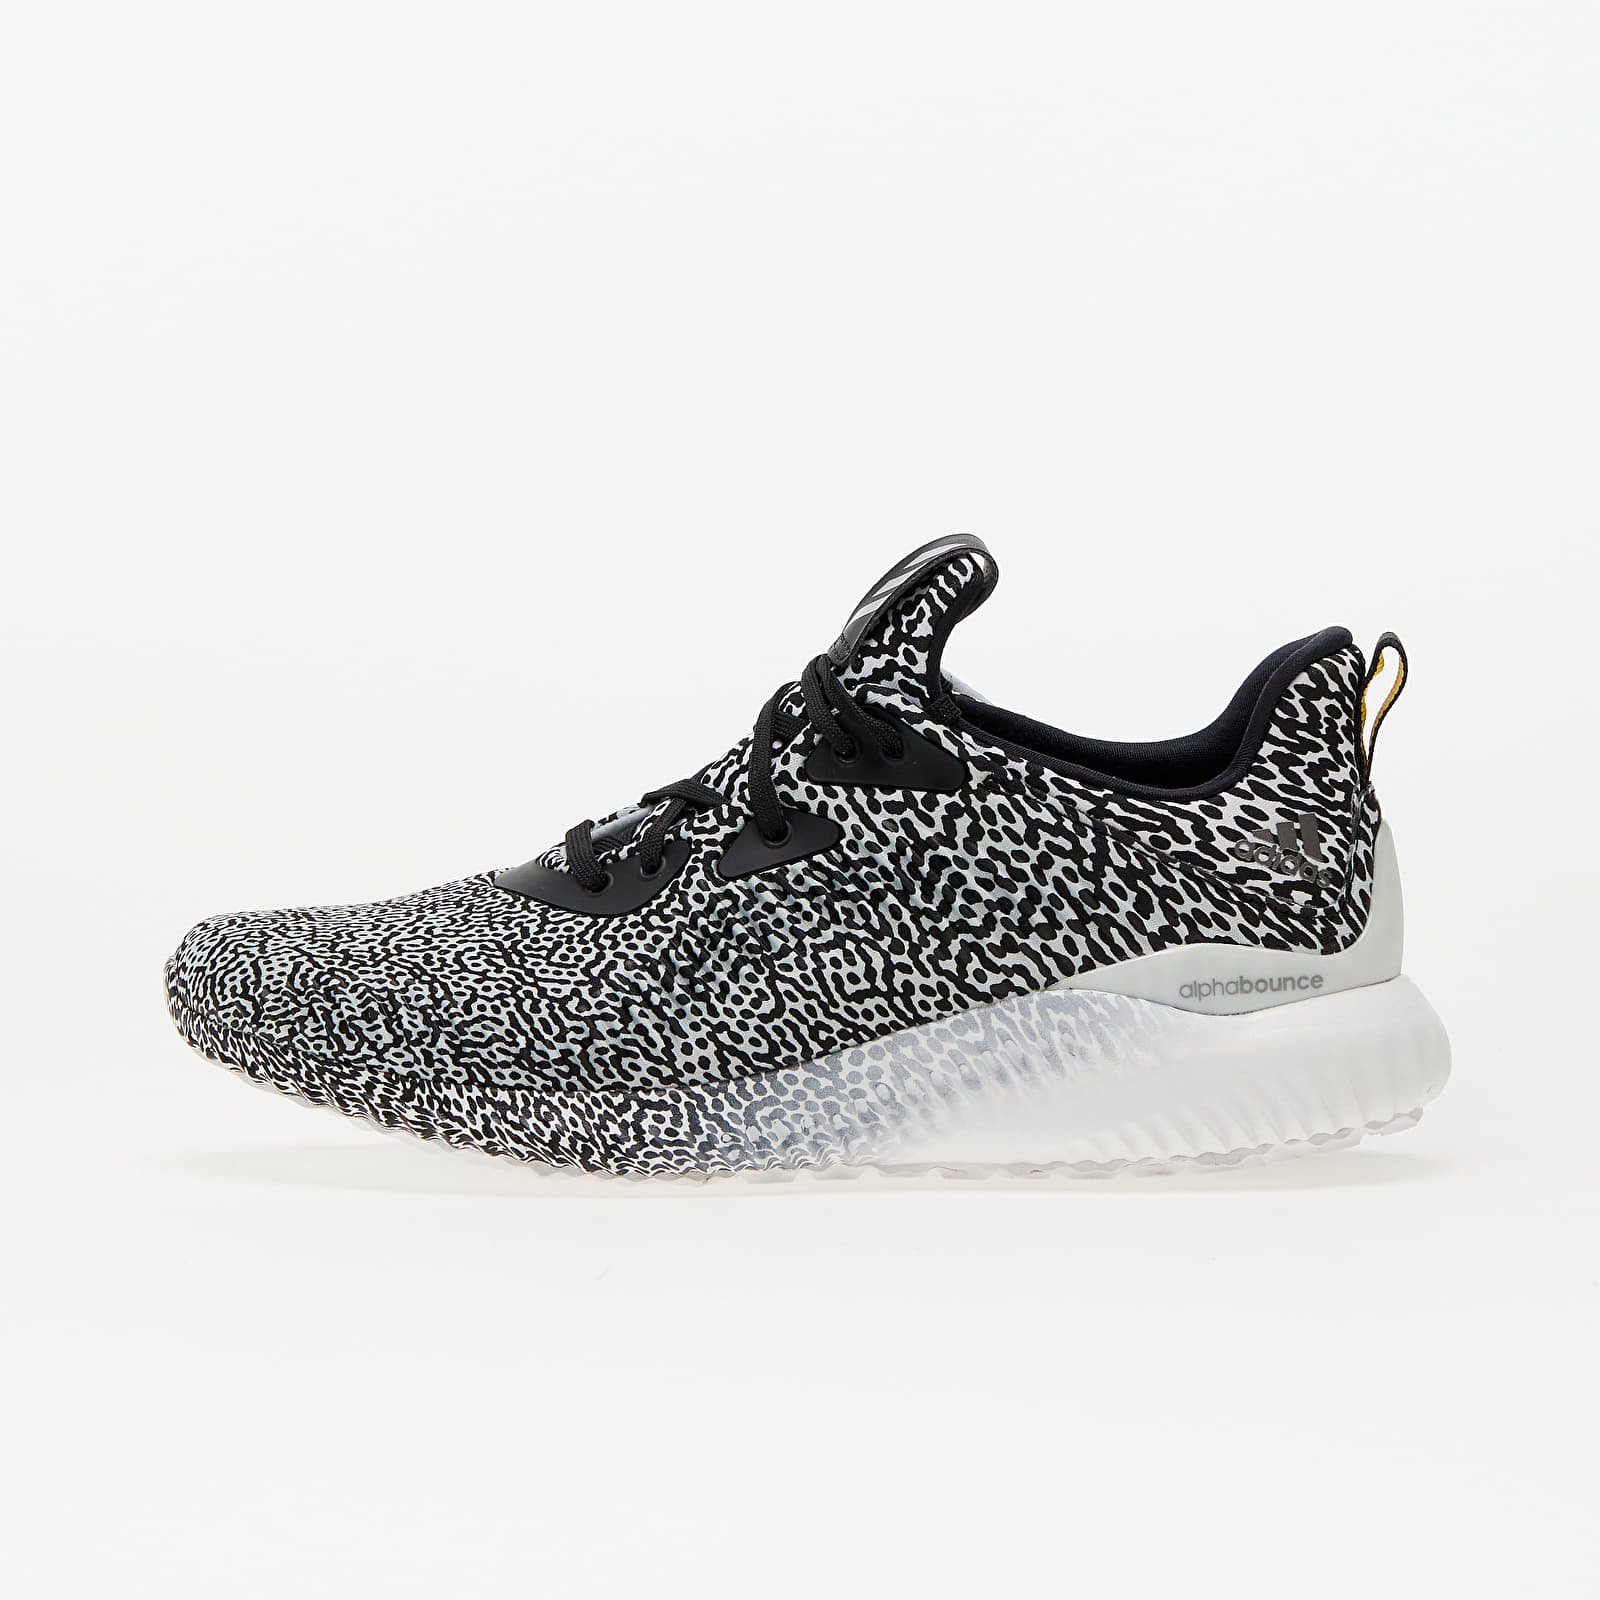 Women's shoes adidas Alphabounce W Aramis Core Black/ Ftwr-White/ Clear Grey